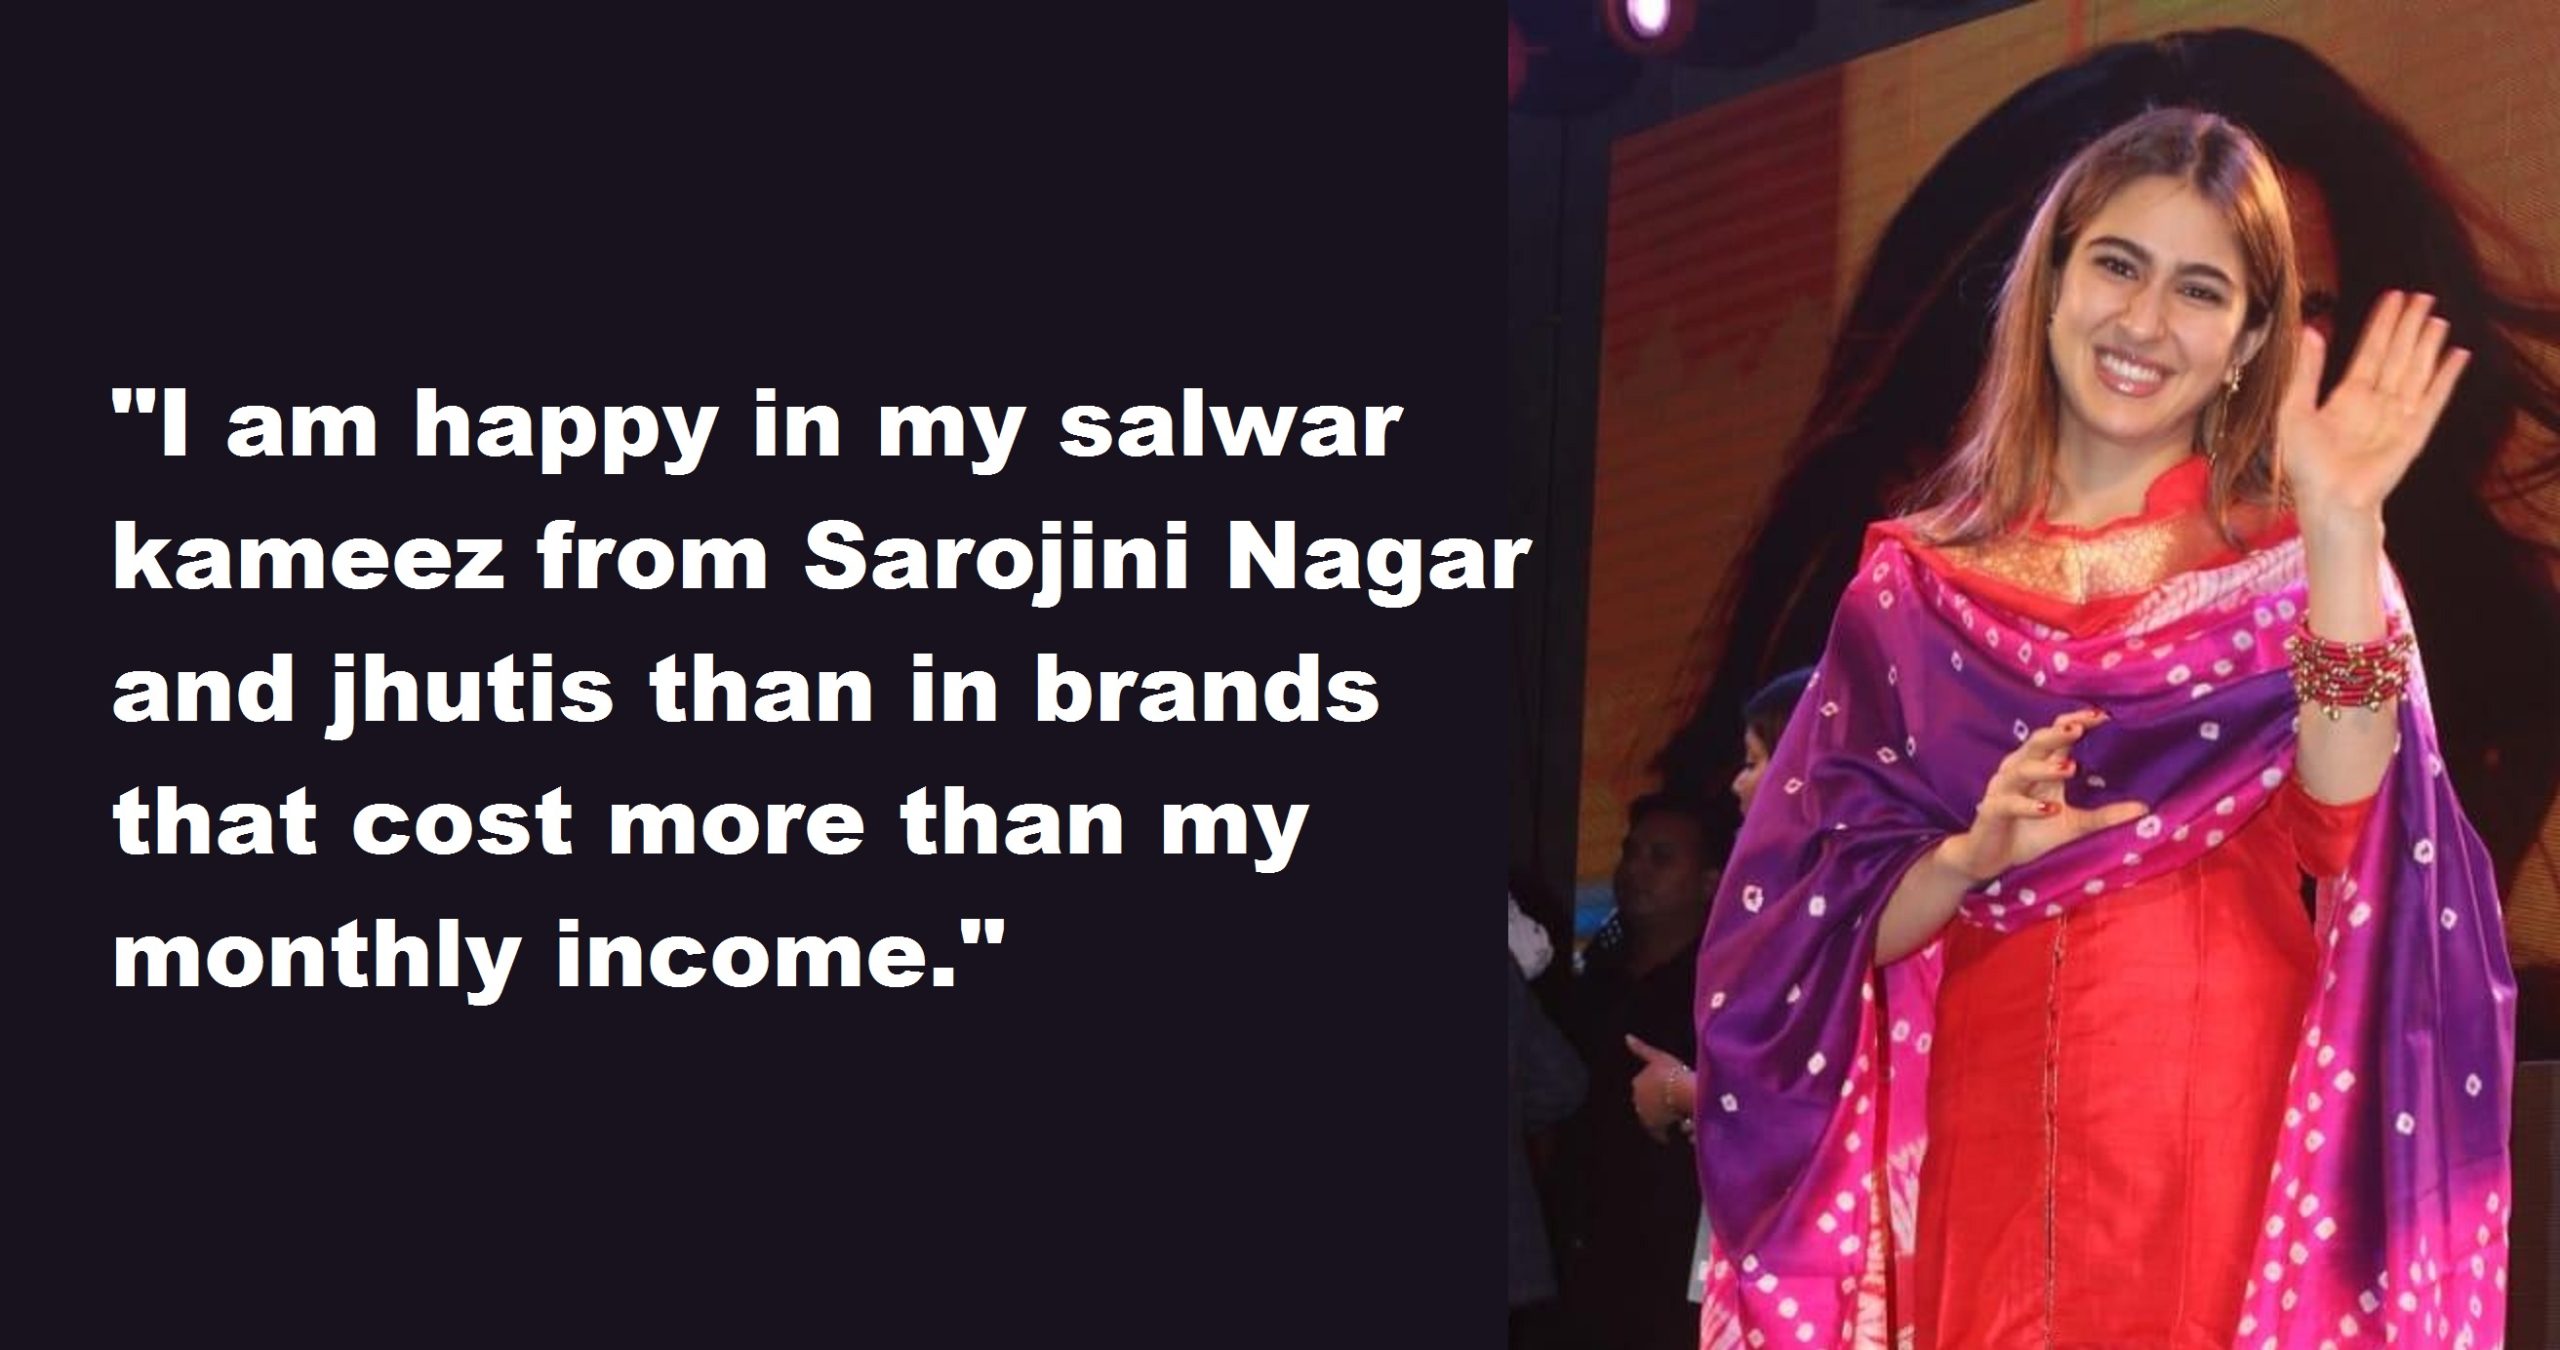 Sara Ali Khan Says She Doesn’t Wear Branded Clothes As They “Cost More Than Her Monthly Income”